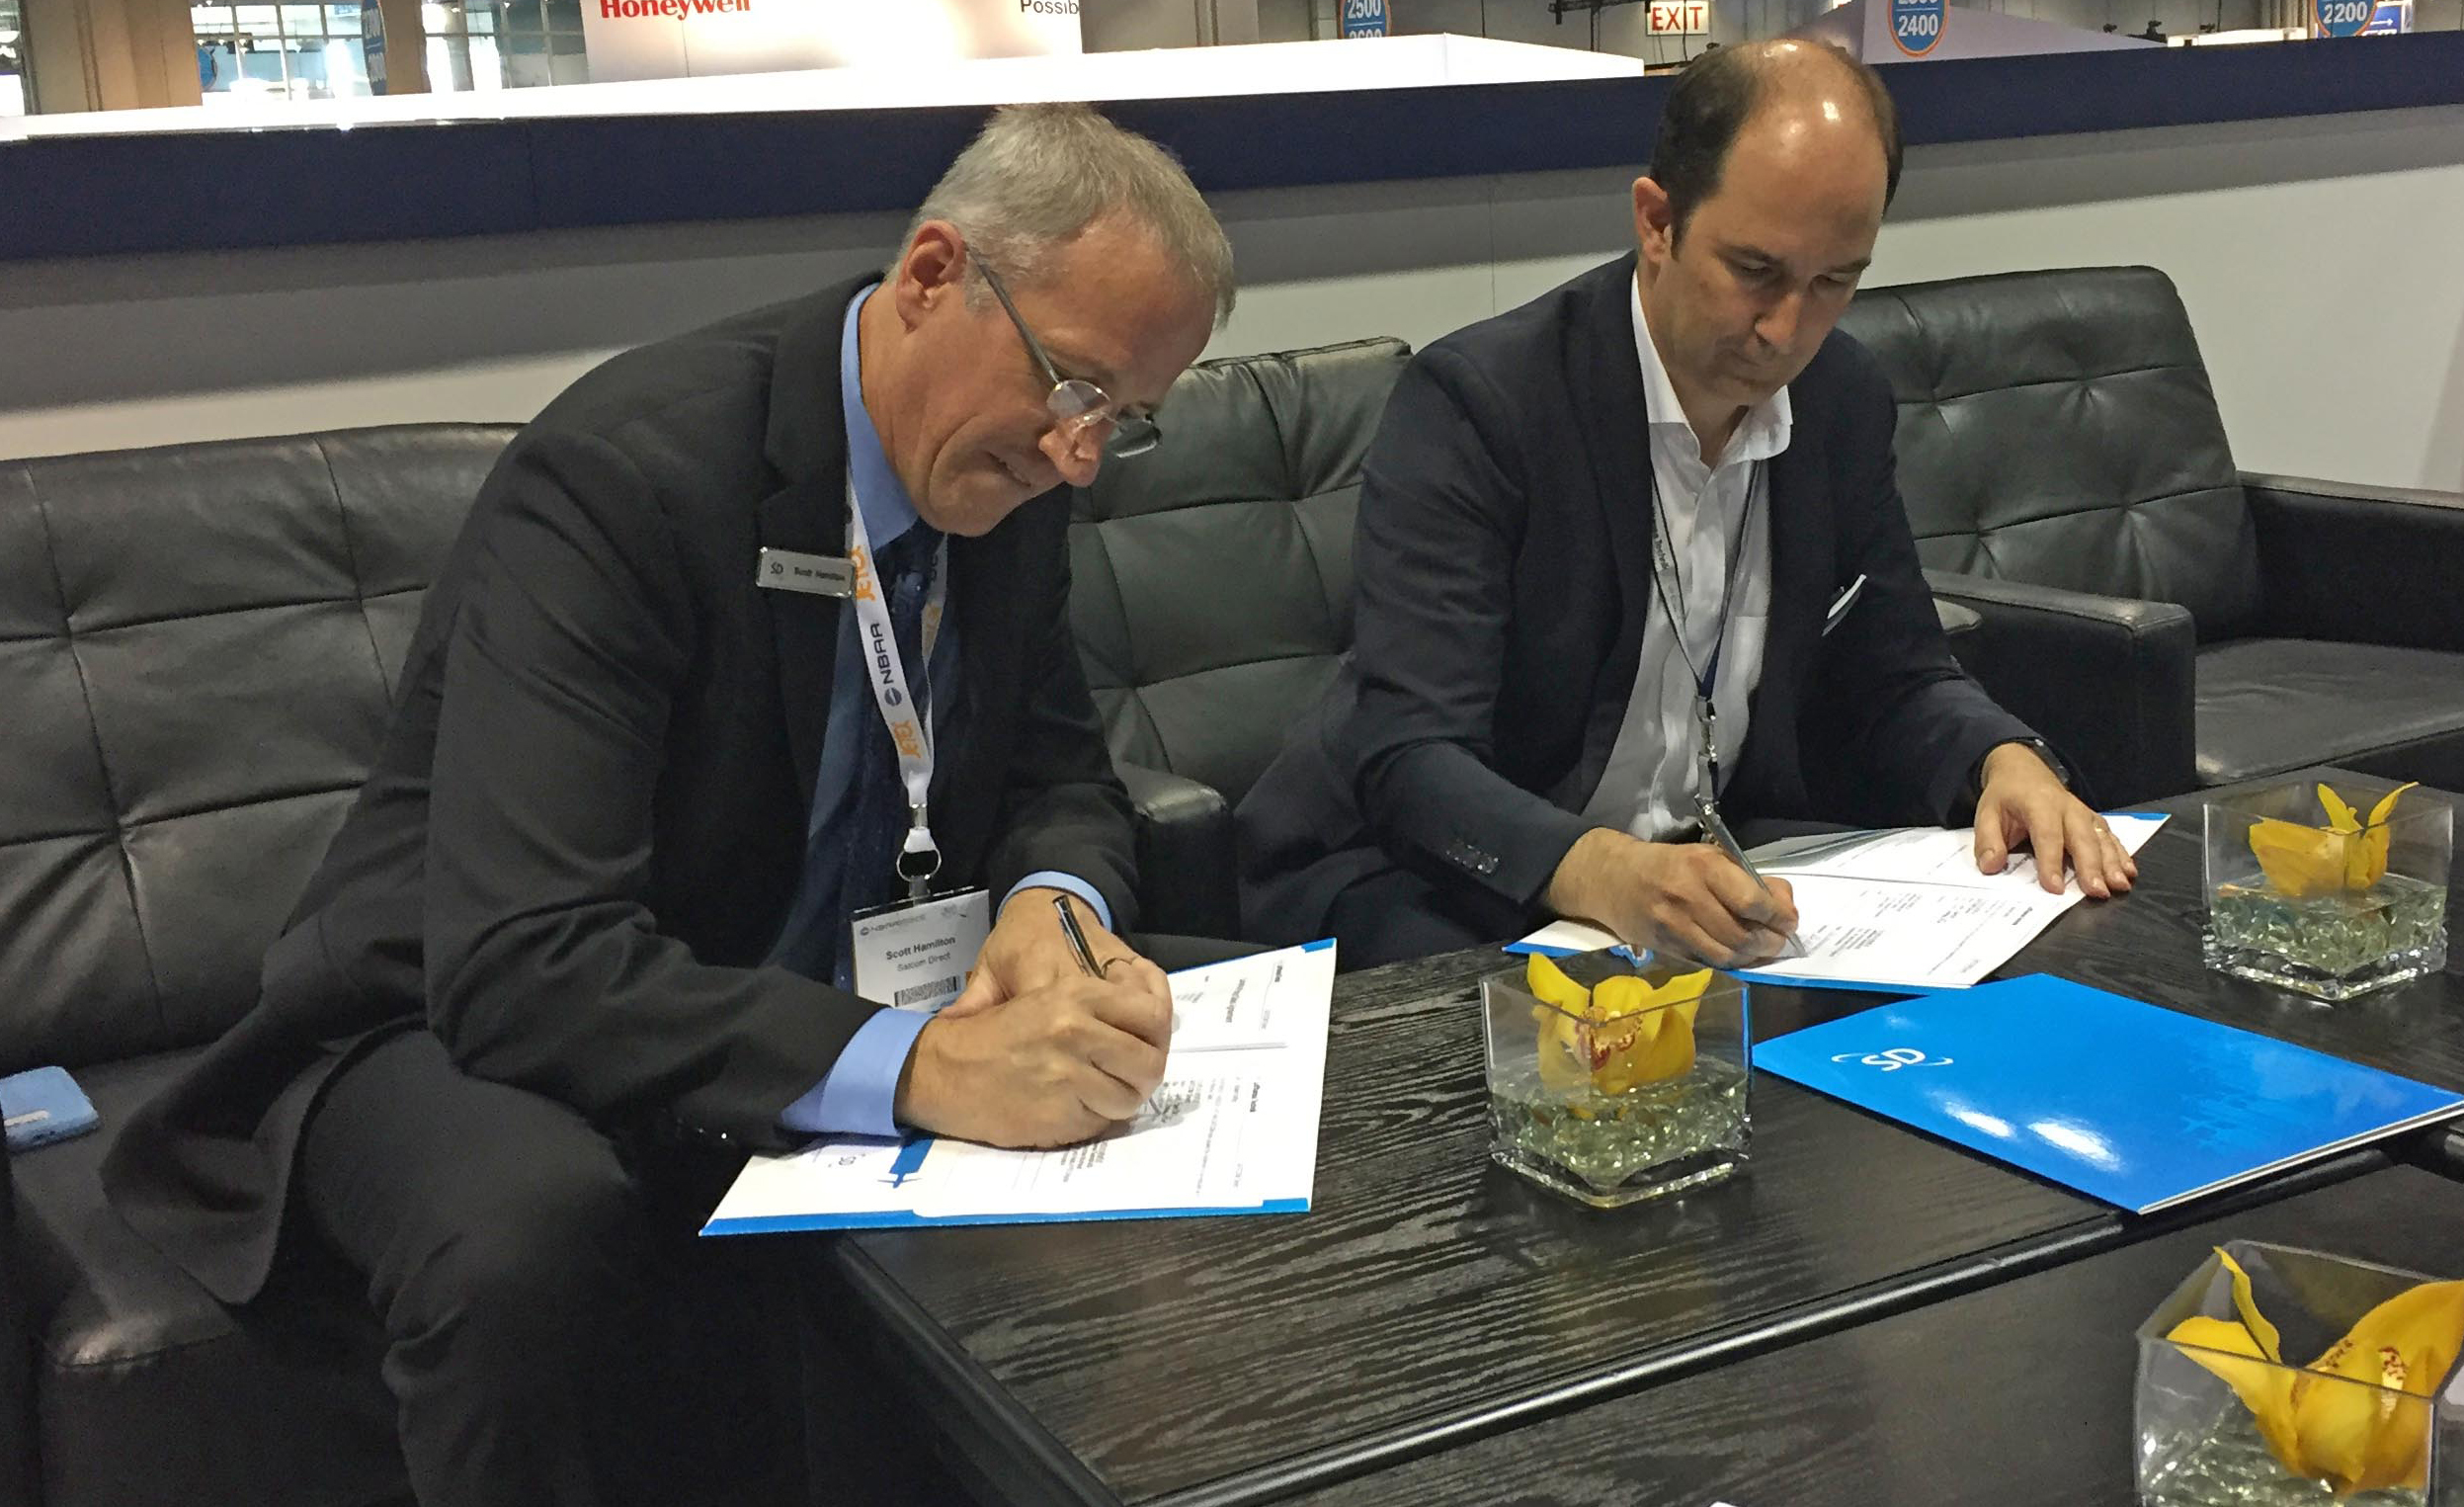 'L to R Scott Hamilton, Chief Strategy Officer, SD signs the new agreement with Andrew Muirhead, VP and Head of PD Original Equipment Innovation Lufthansa Technik AG